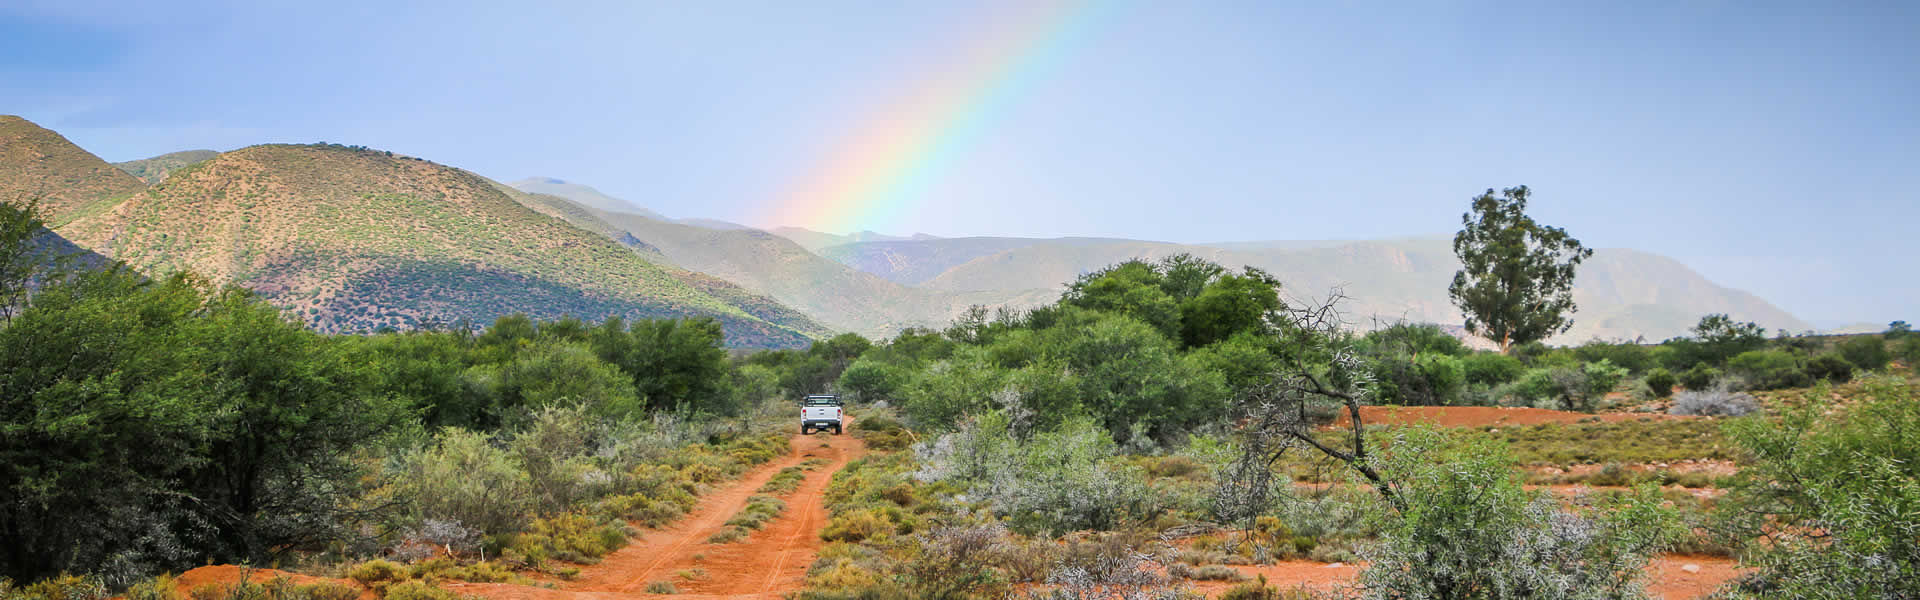 The Karoo says Thank You after some rain